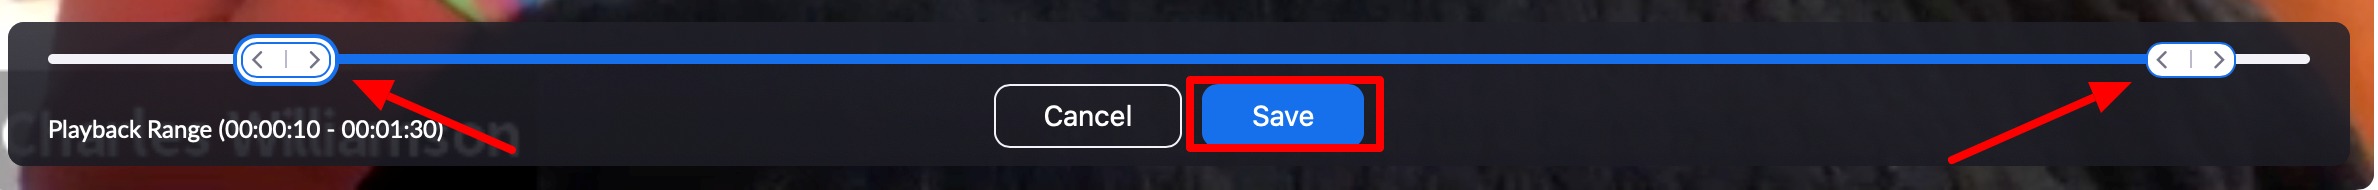 Beginning and ending sliders in video timeline with Save button below